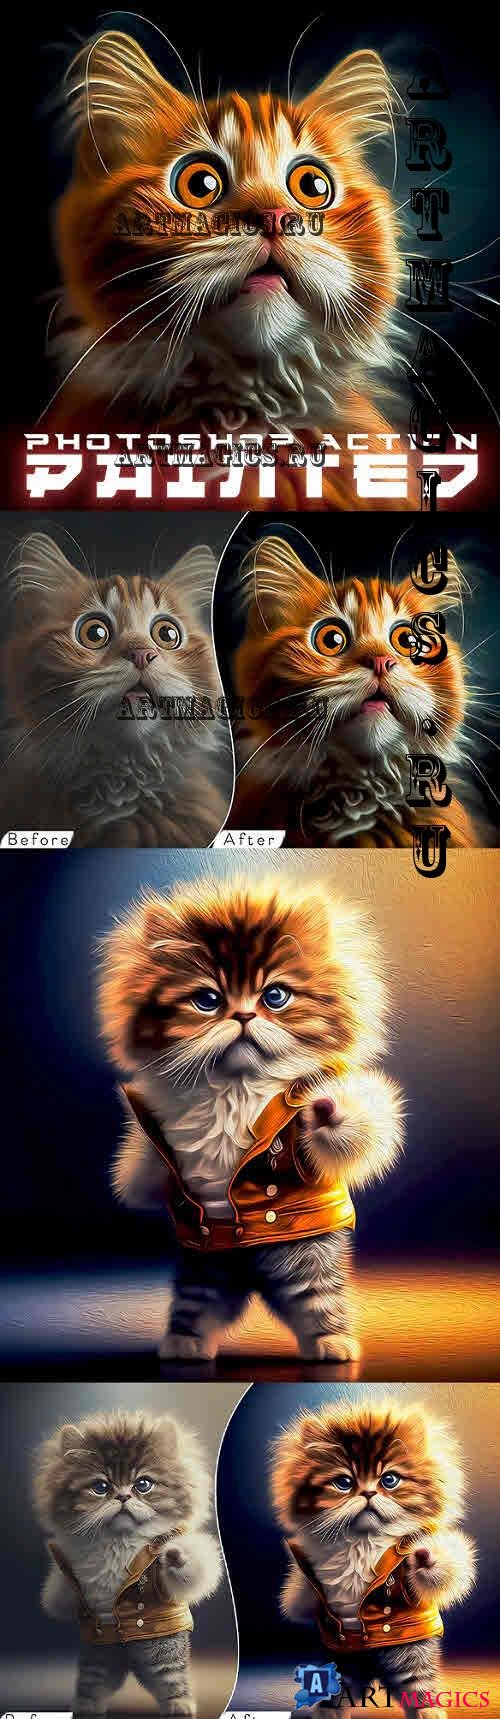 PRO Painted Painting Photoshop Action - 44534405